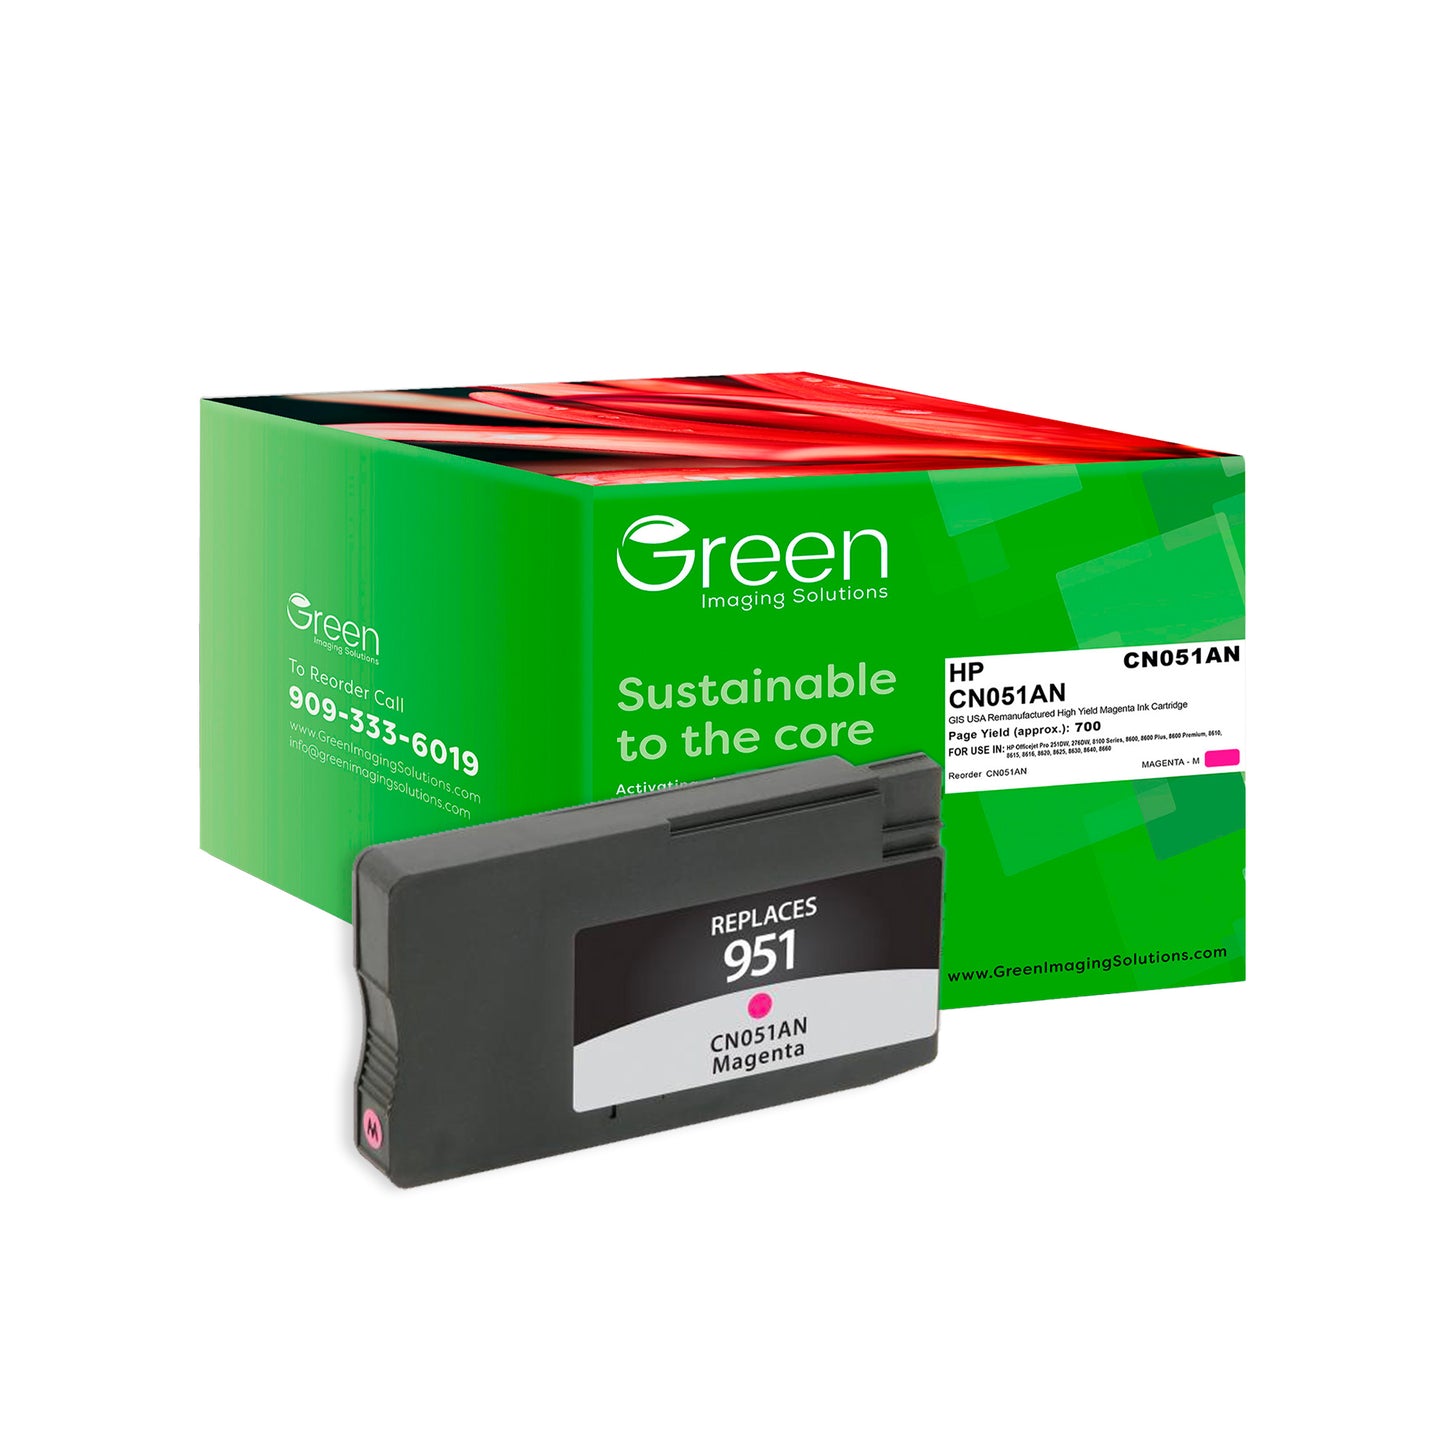 Green Imaging Solutions USA Remanufactured Magenta Ink Cartridge for HP 951 (CN051AN)